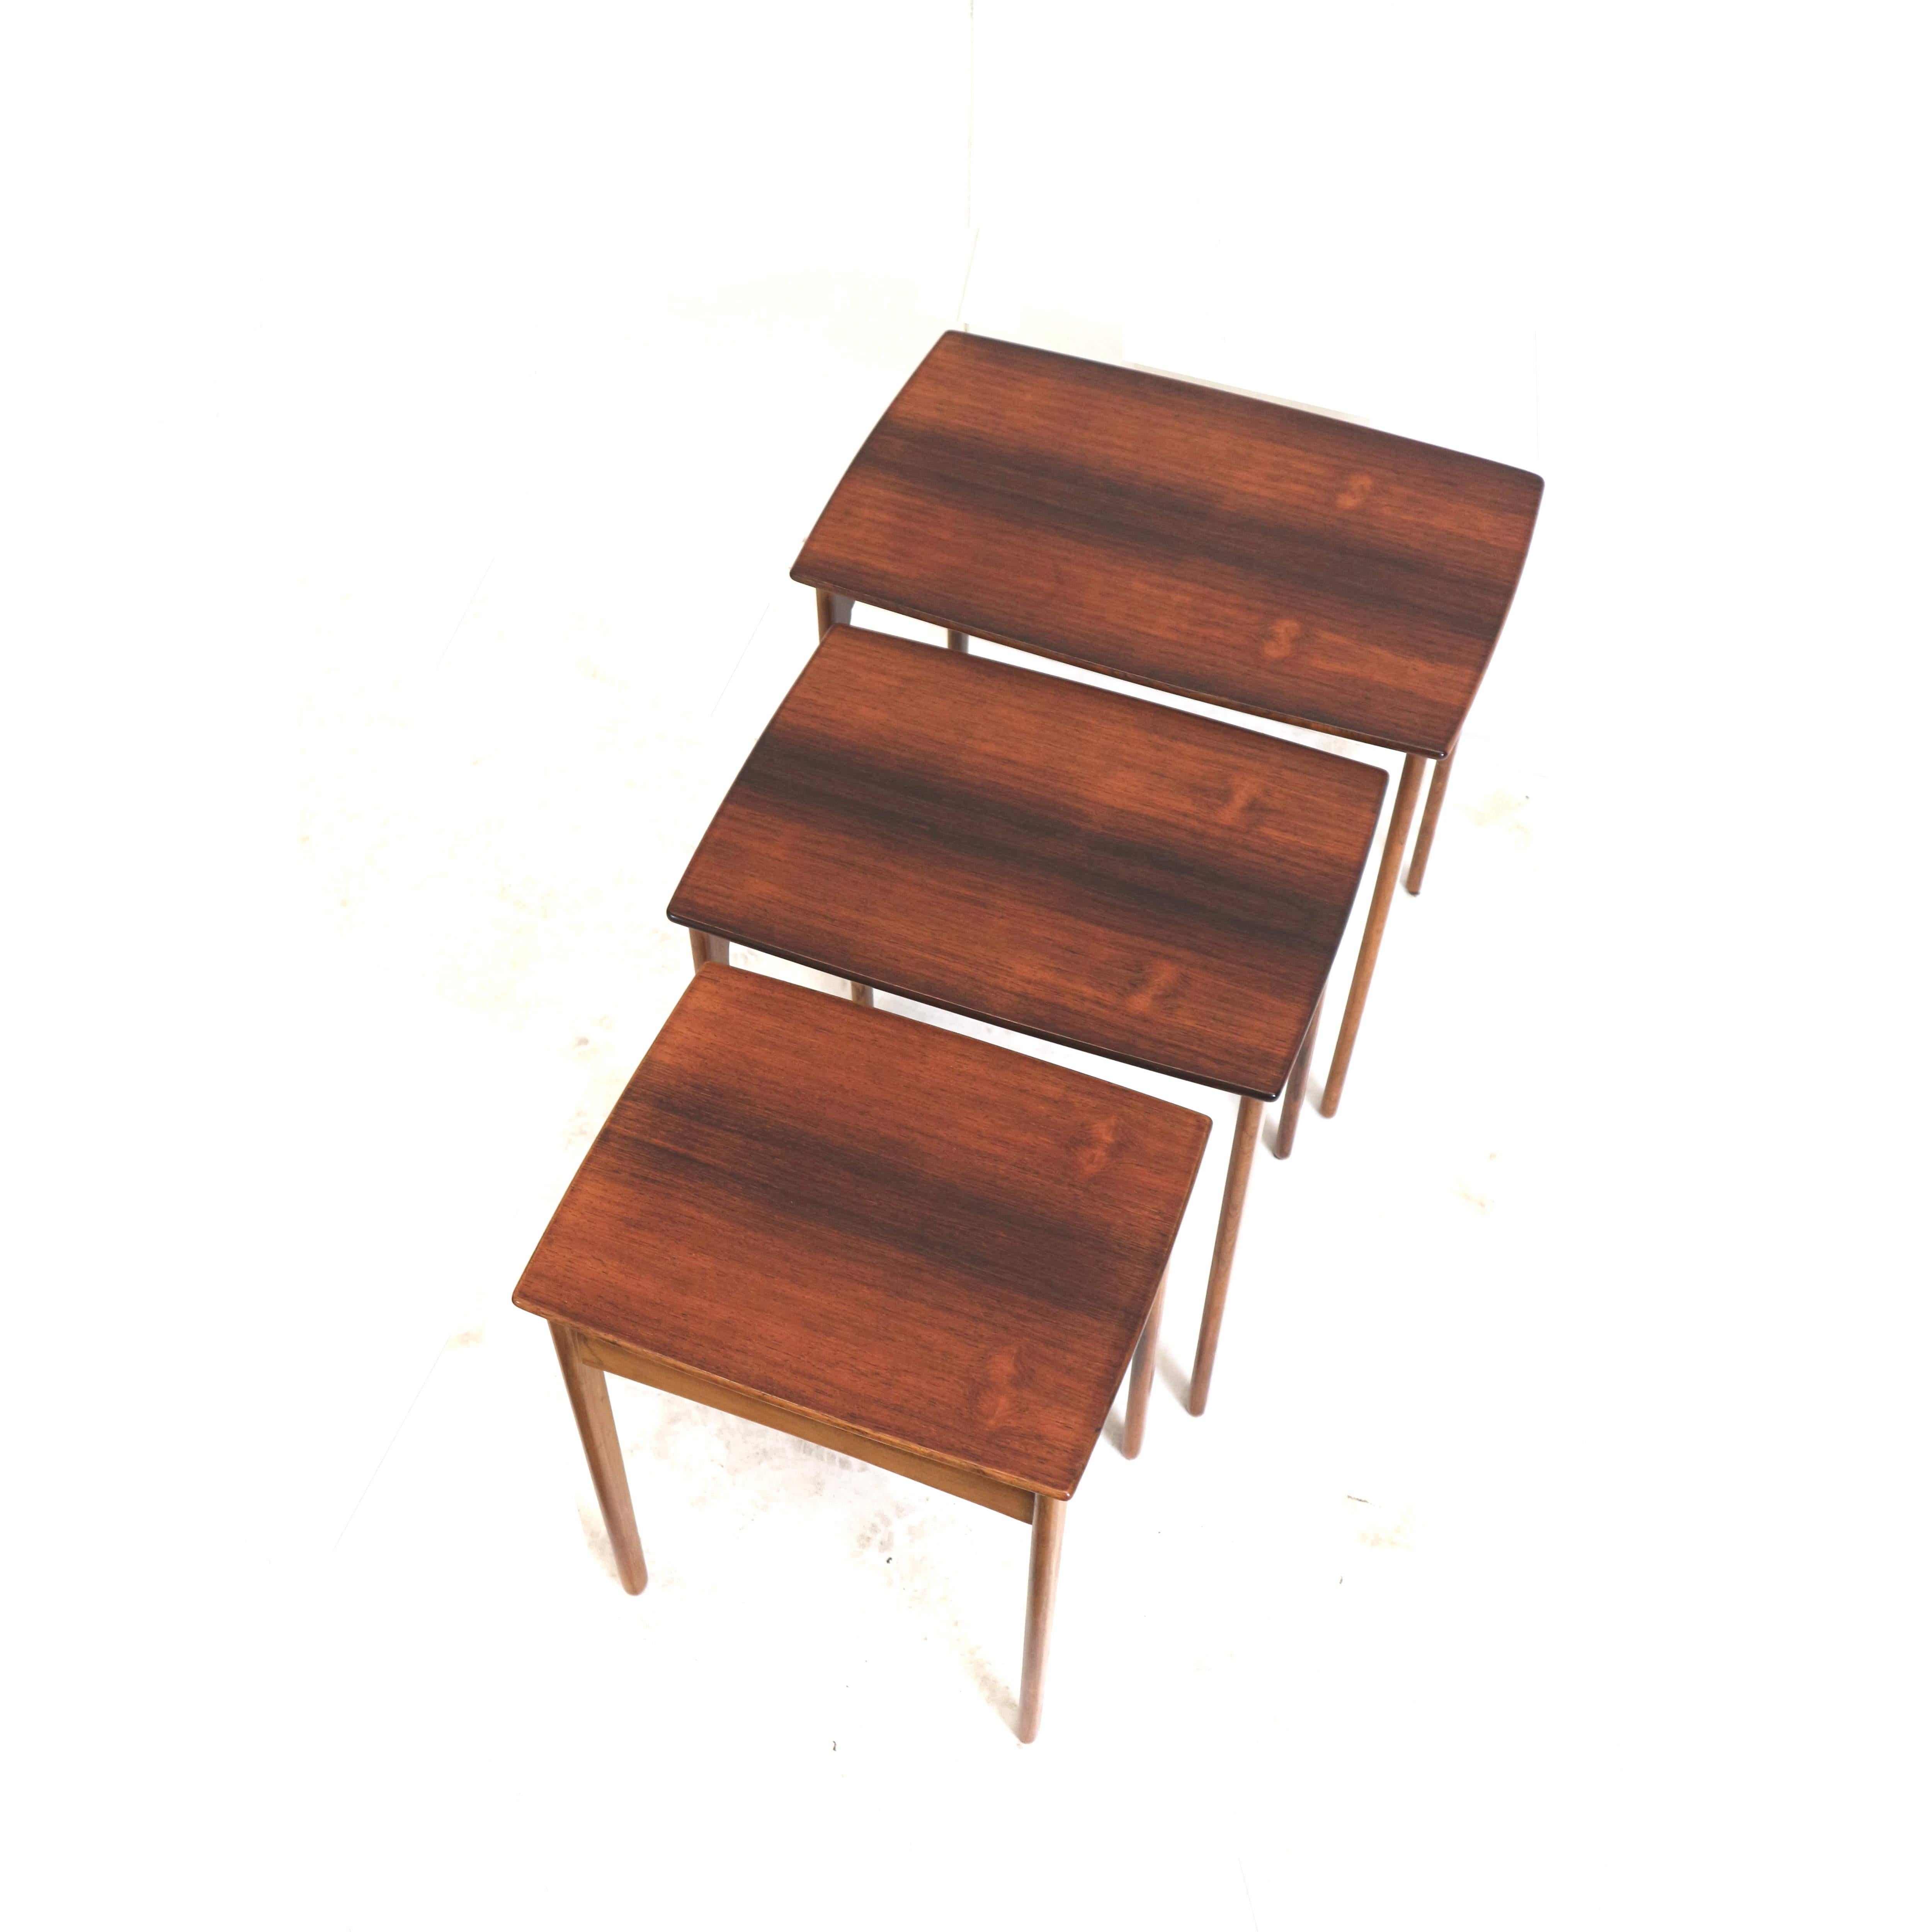 Danish vintage rosewood nesting tables / set of 3 side tables made in the 60s For Sale 3